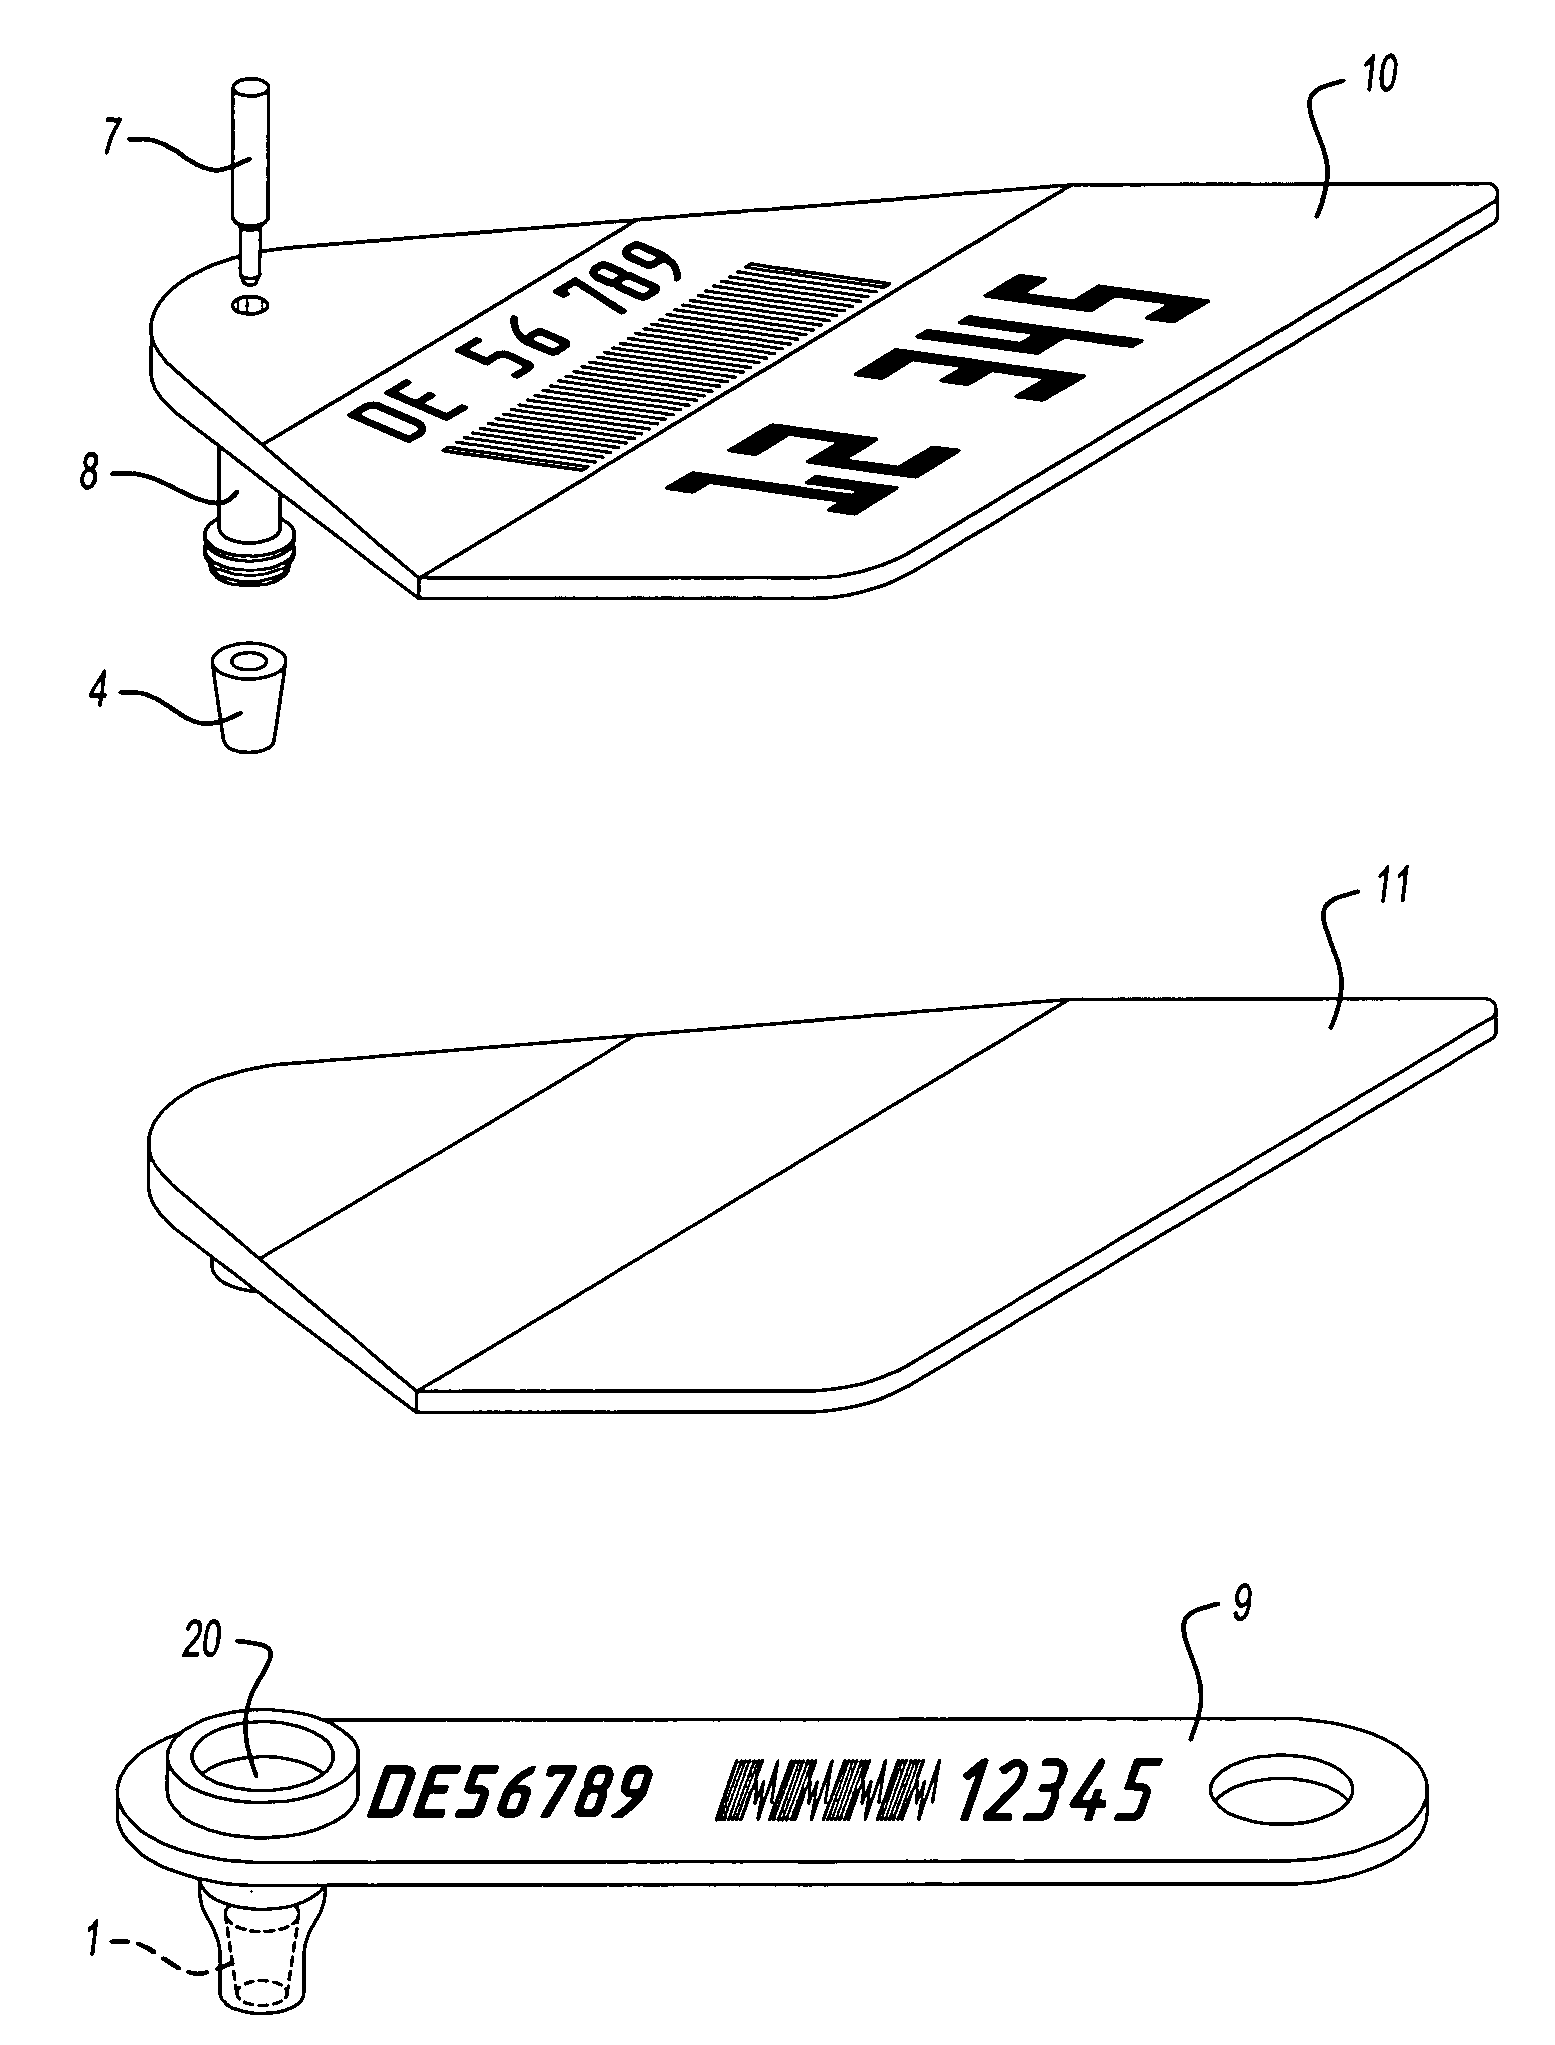 Modified ear tags and method for removing tissue